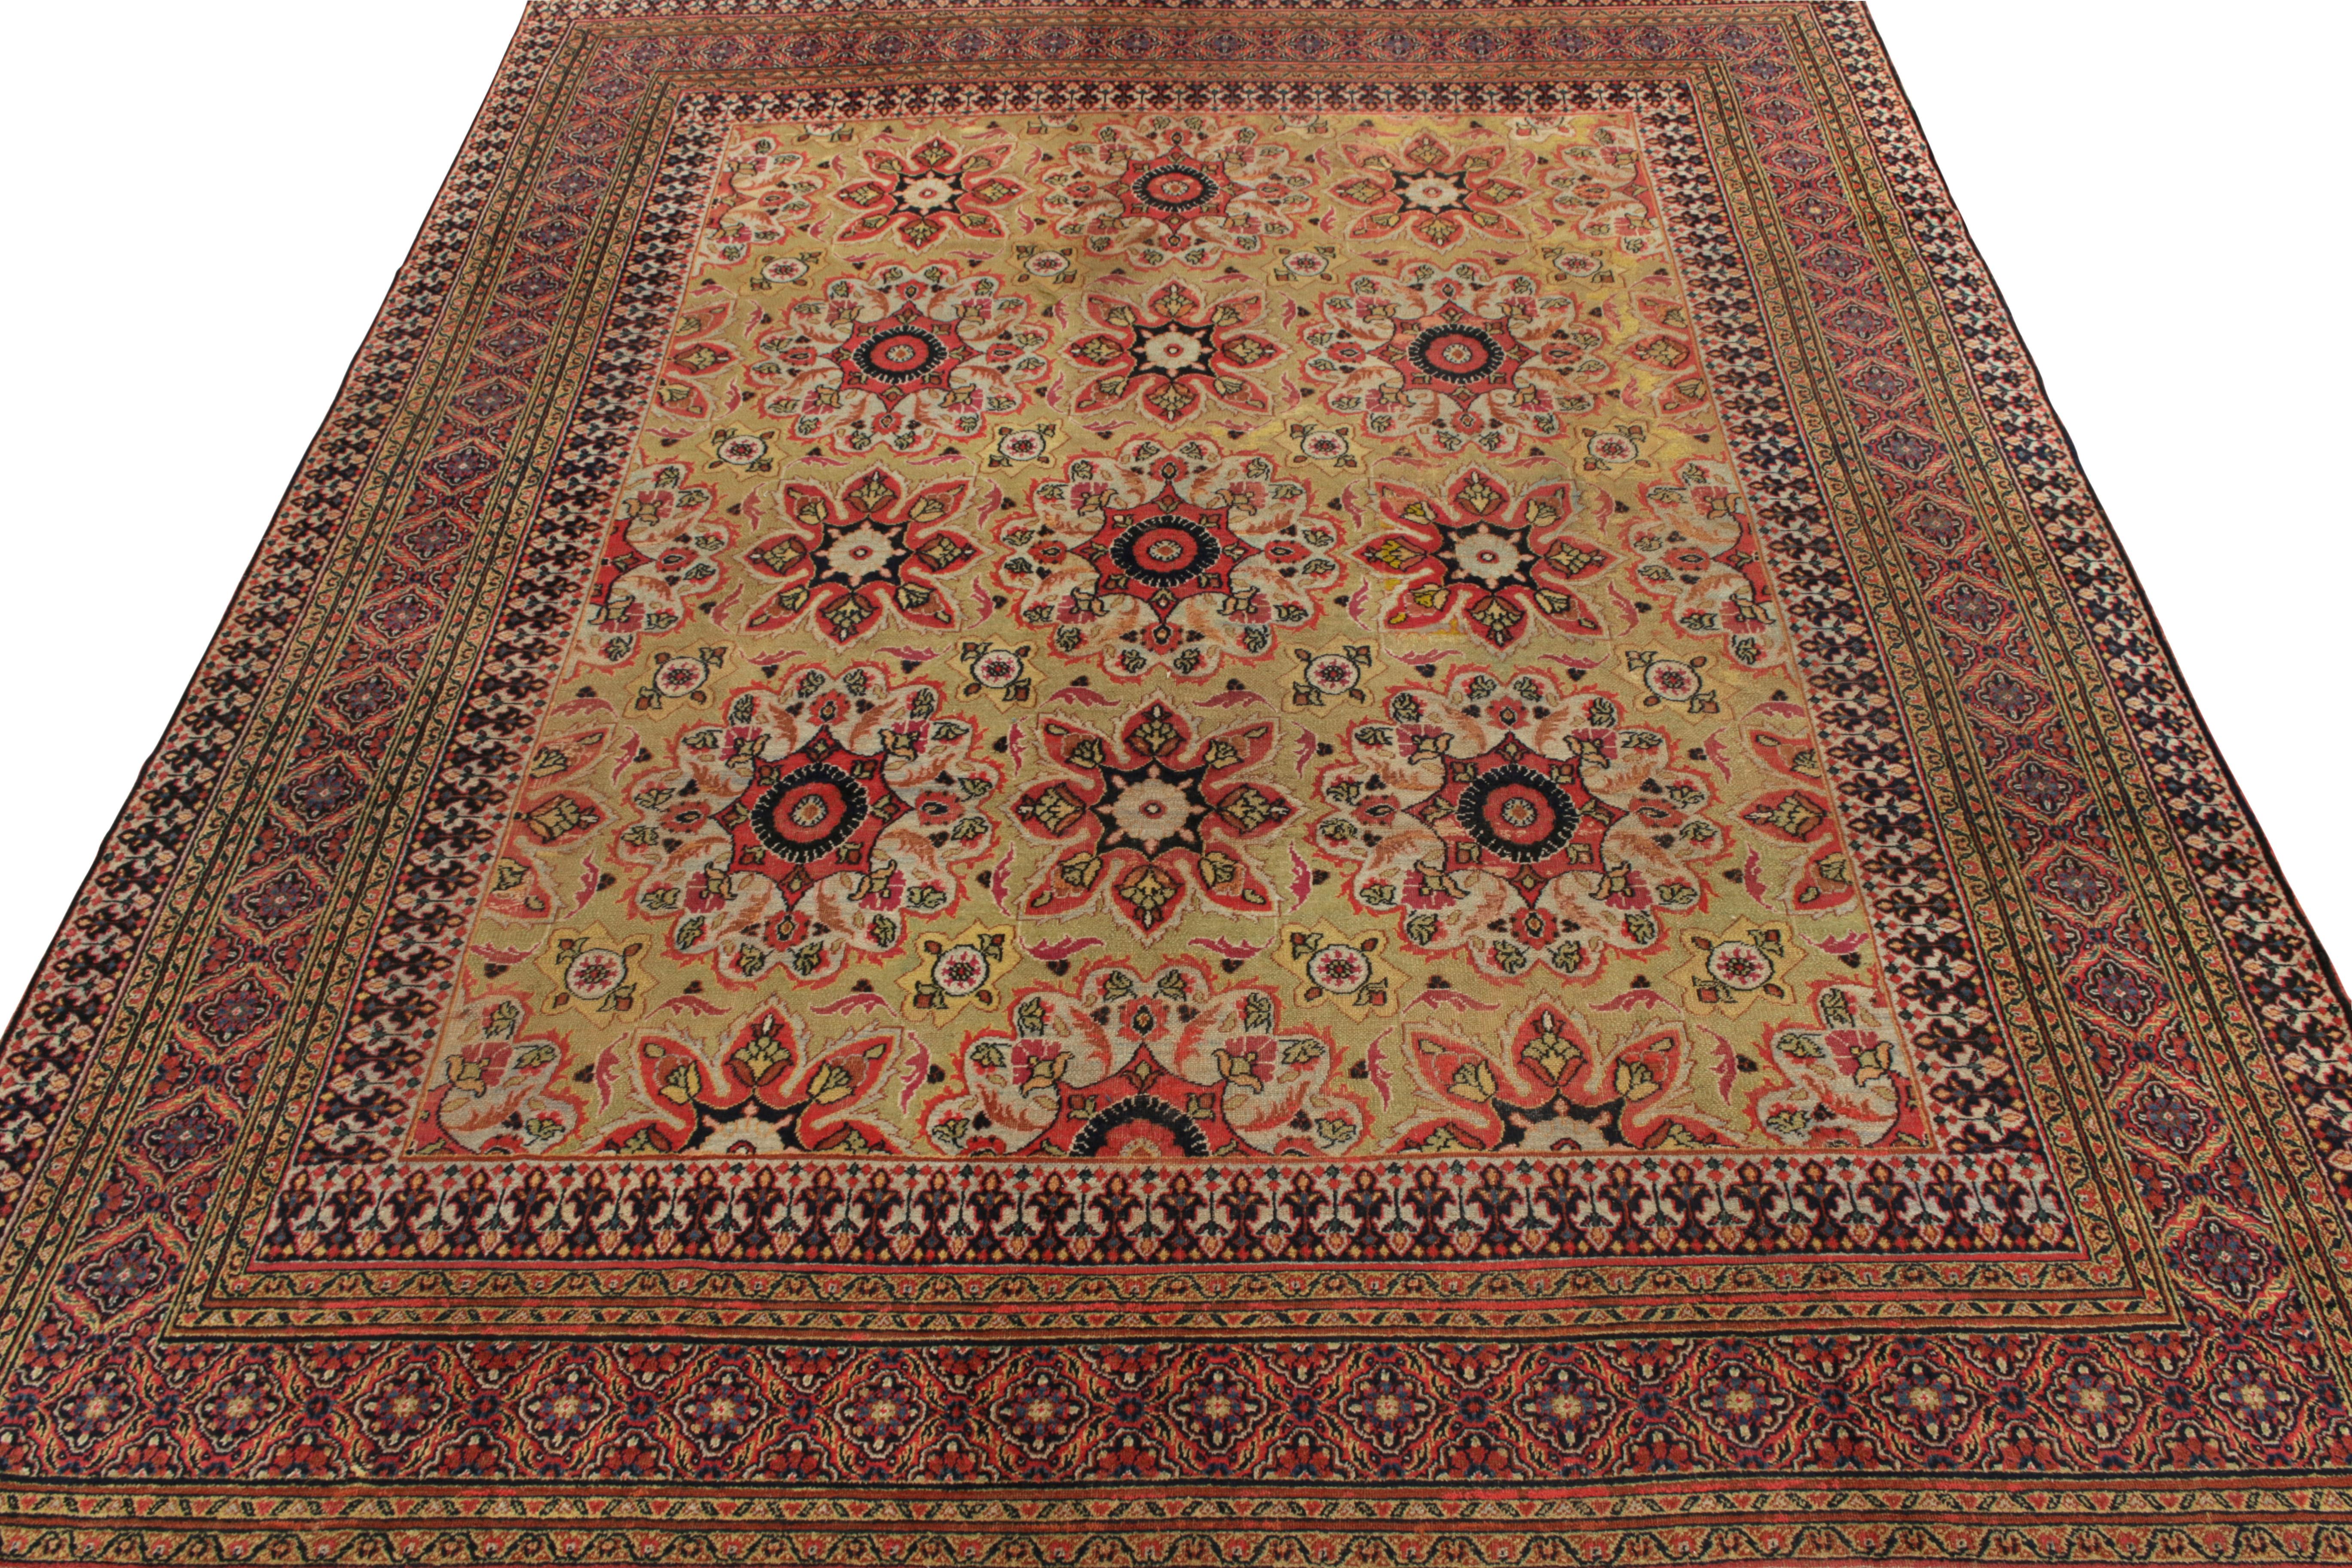 Hand-knotted in wool circa 1920-1930, a 9x12 antique Indian rug making way to Rug & Kilim’s coveted Antique & Vintage collection. Emanating traditional Indian vibes while drawing on Mashad Doroksh Khorassan rug sensibilities—this 19th Century Indian